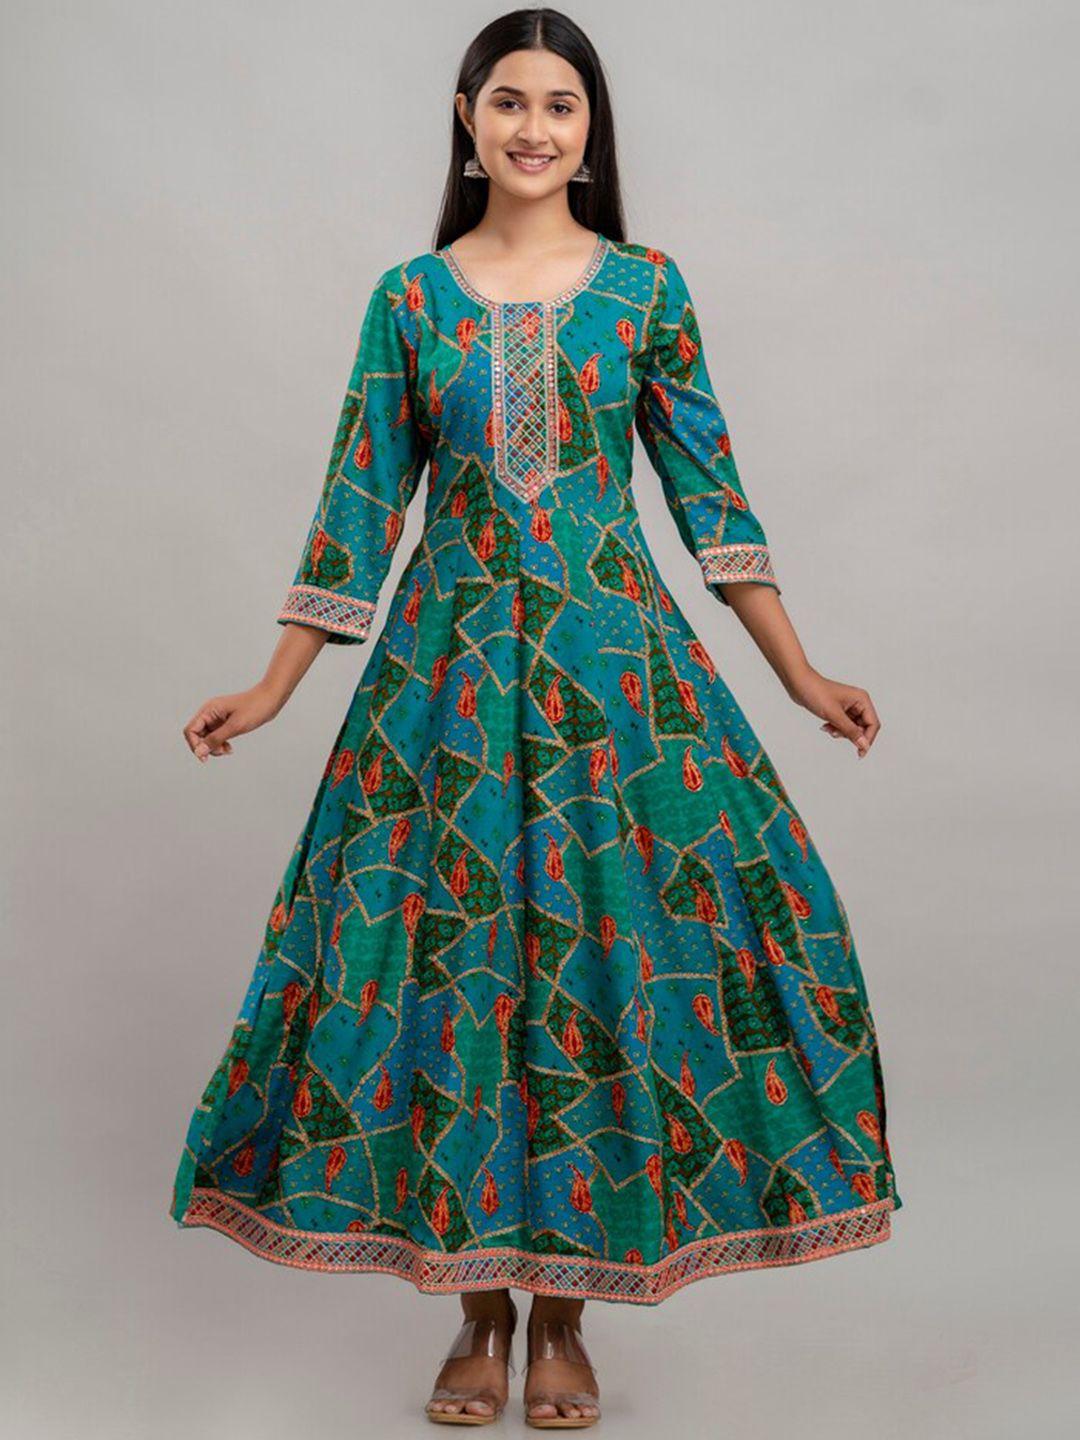 ckm ethnic motifs embroidered embellished detailed a-line ethnic dress